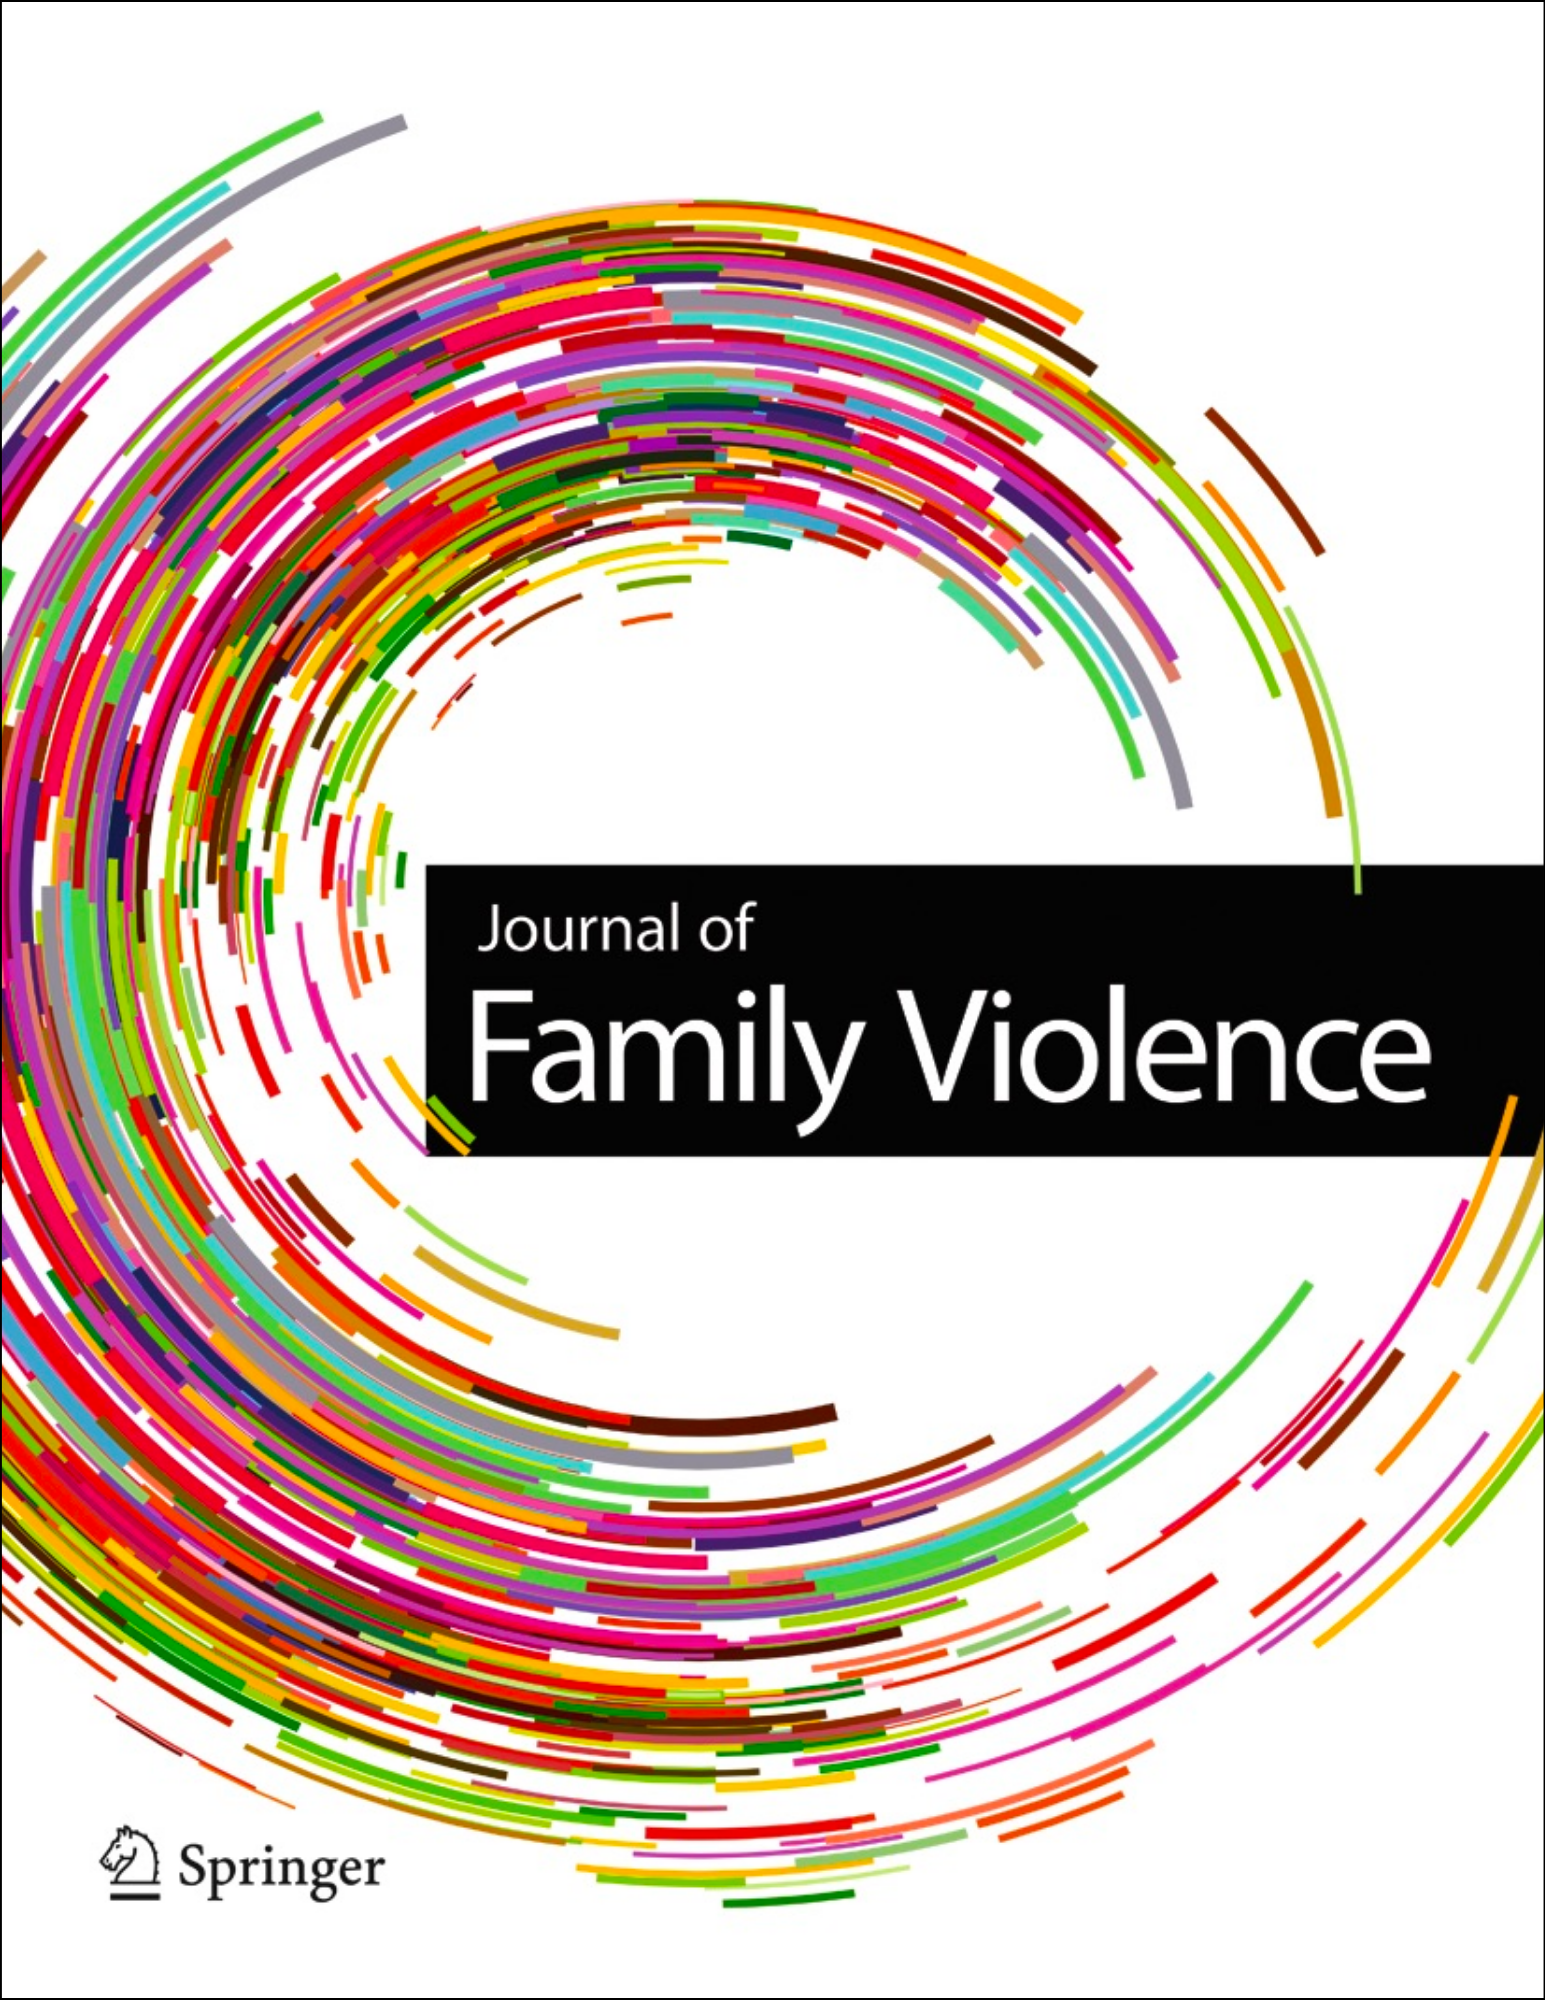 Journal of family violence